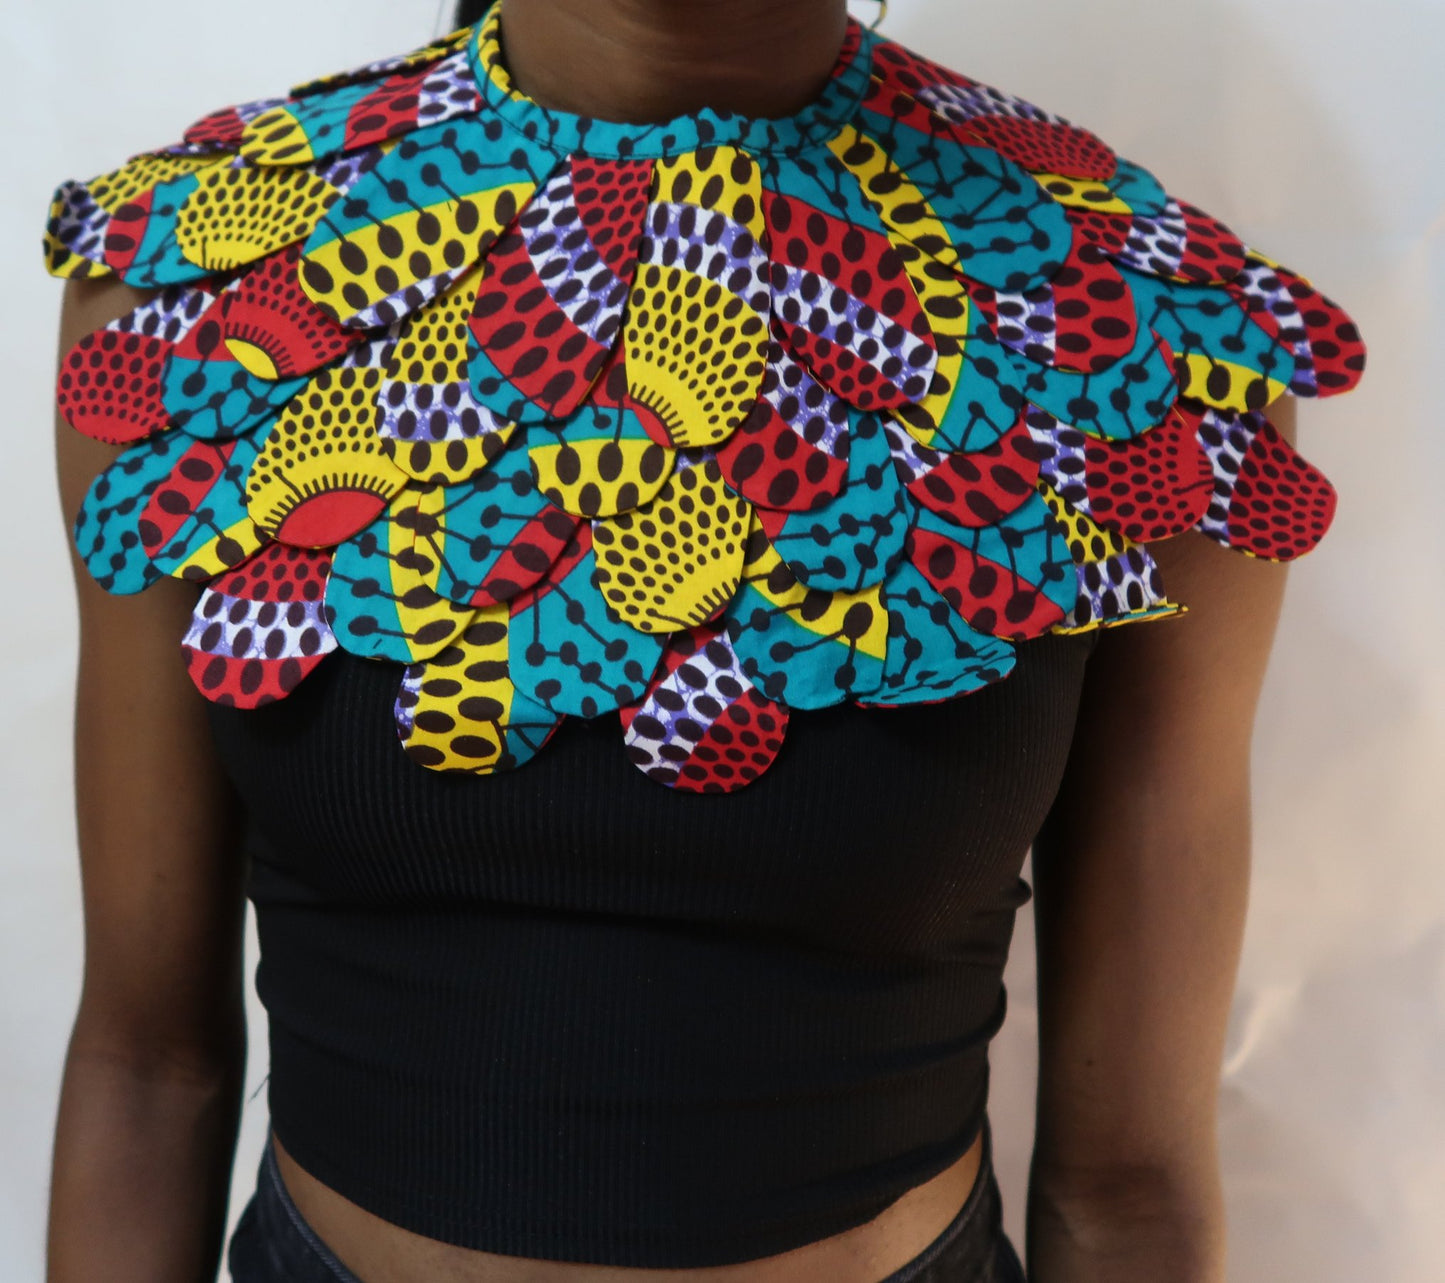 Choker cape collar African fabric statement necklace - Red, yellow, blue and black